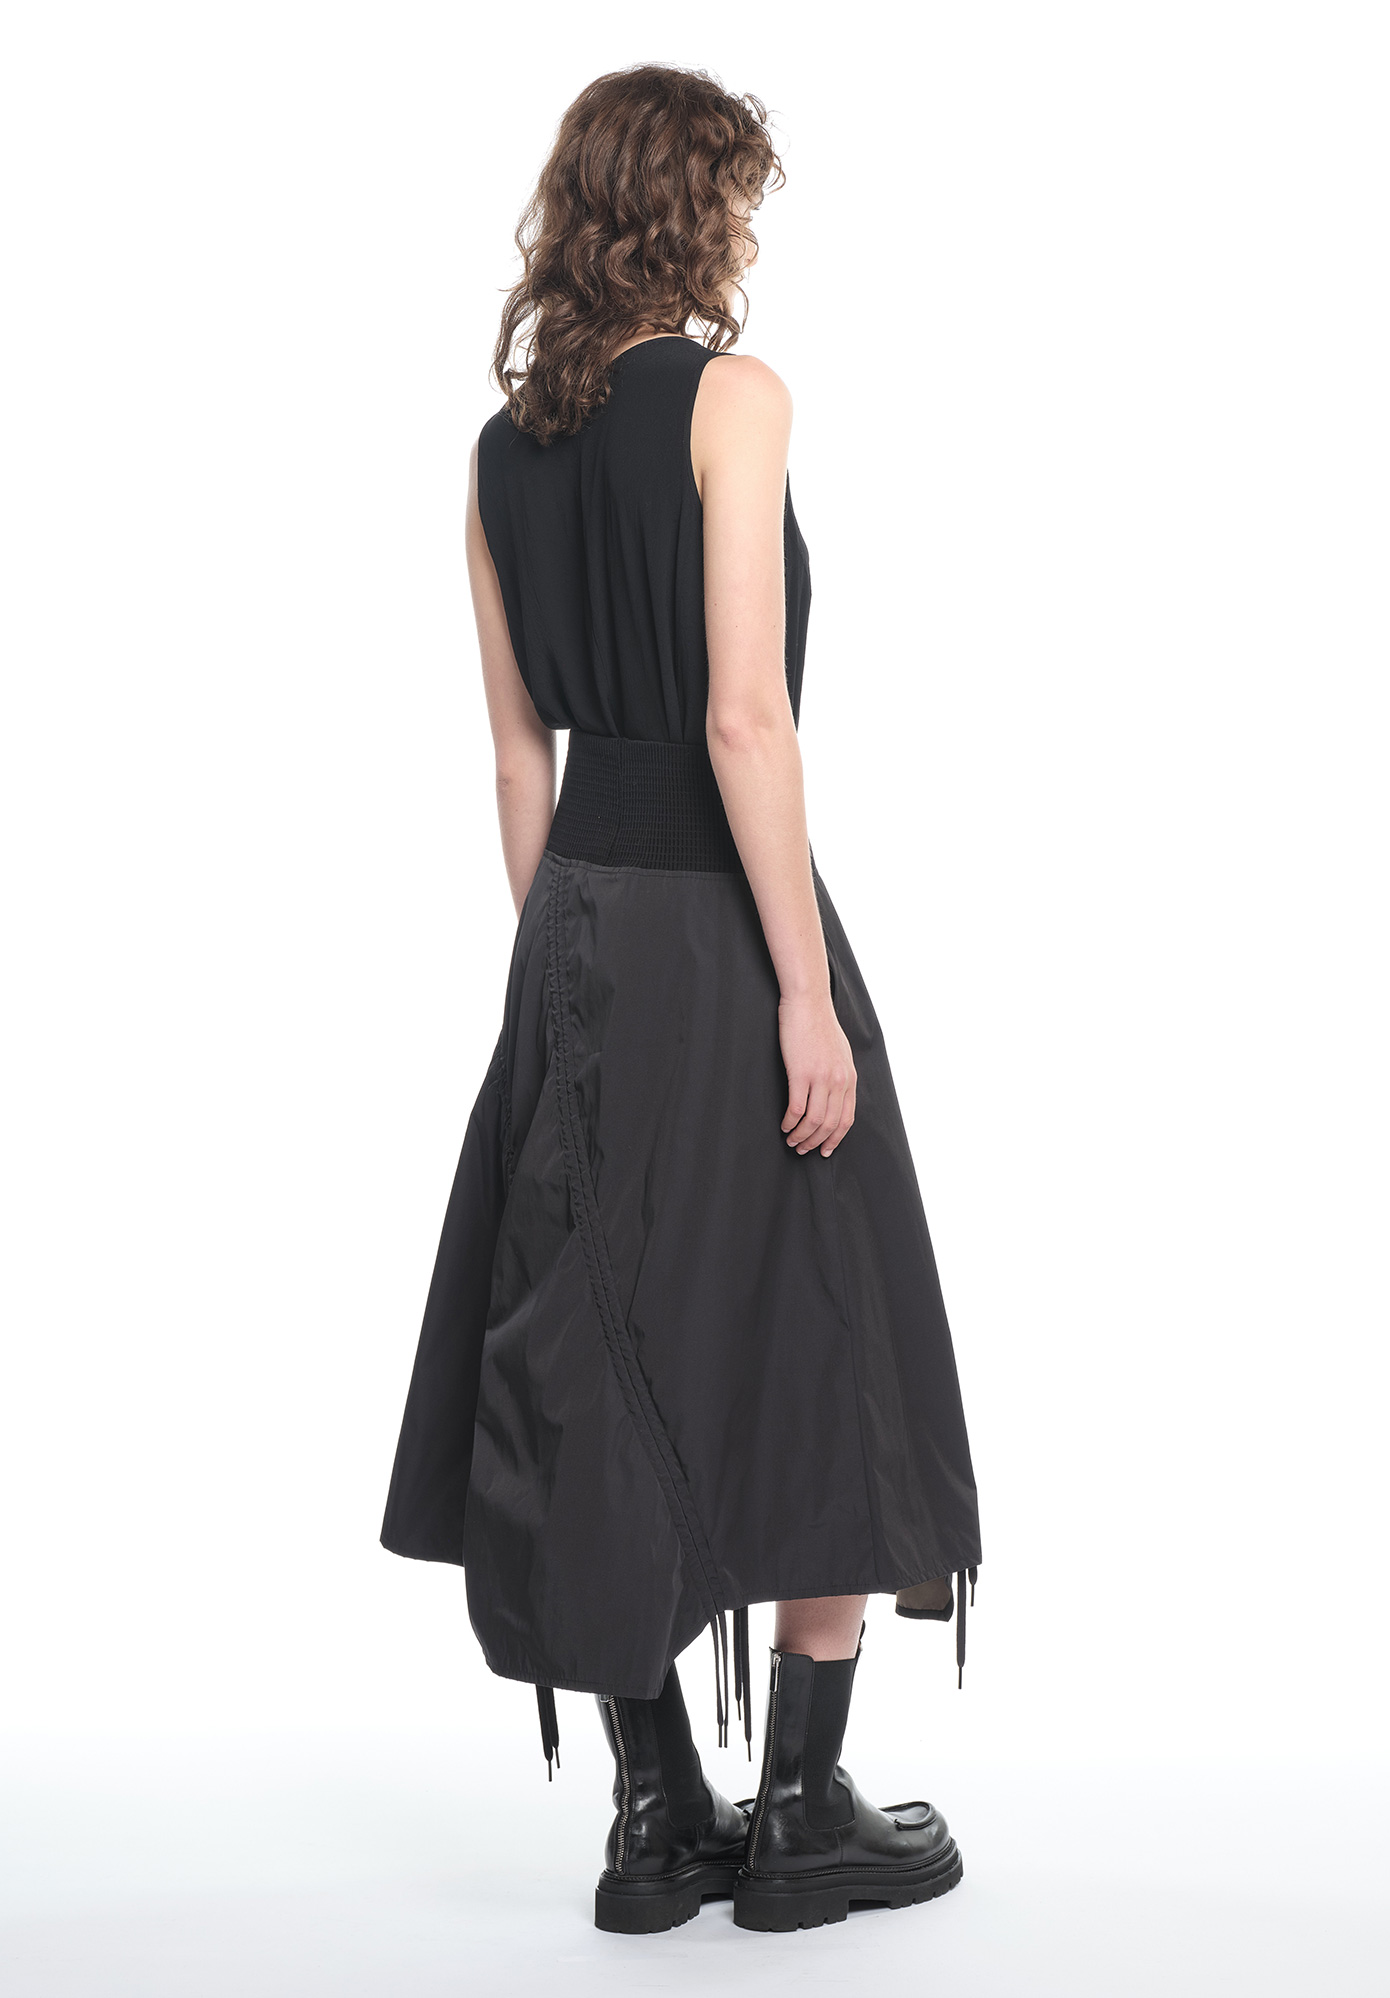 PROJECTION DRAWCORD SKIRT - BLACK